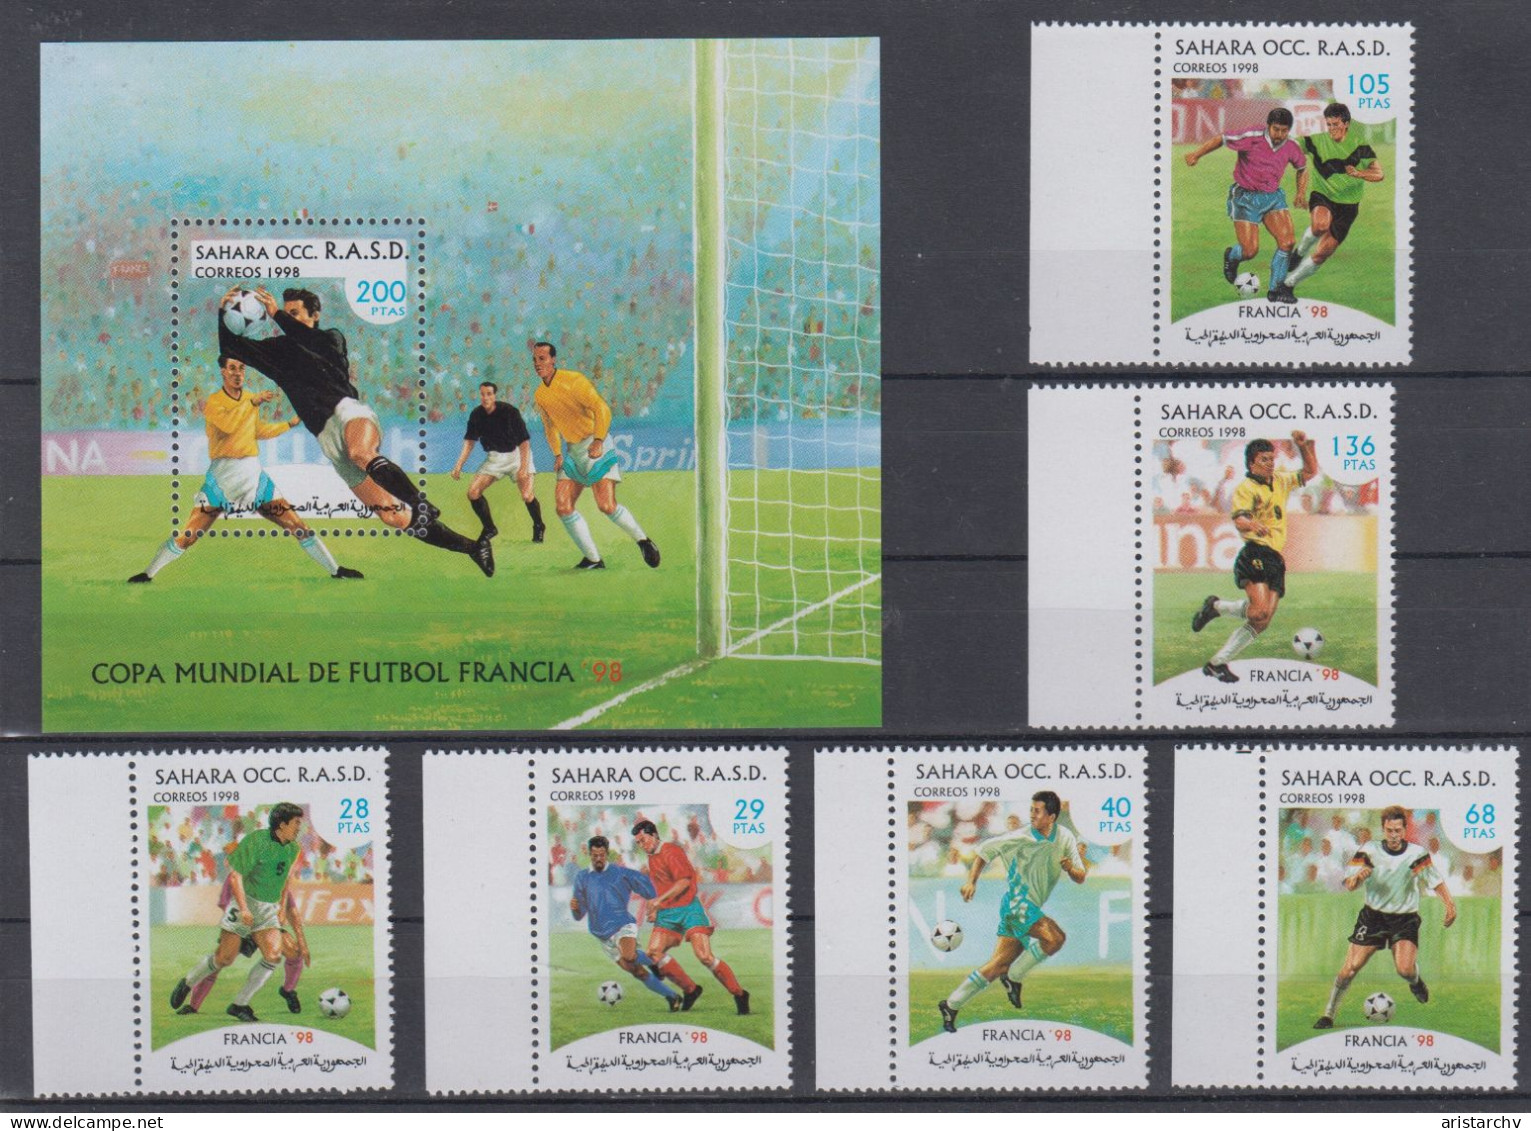 SAHARA OCC 1998 FOOTBALL WORLD CUP S/SHEET AND 6 STAMPS - 1998 – France